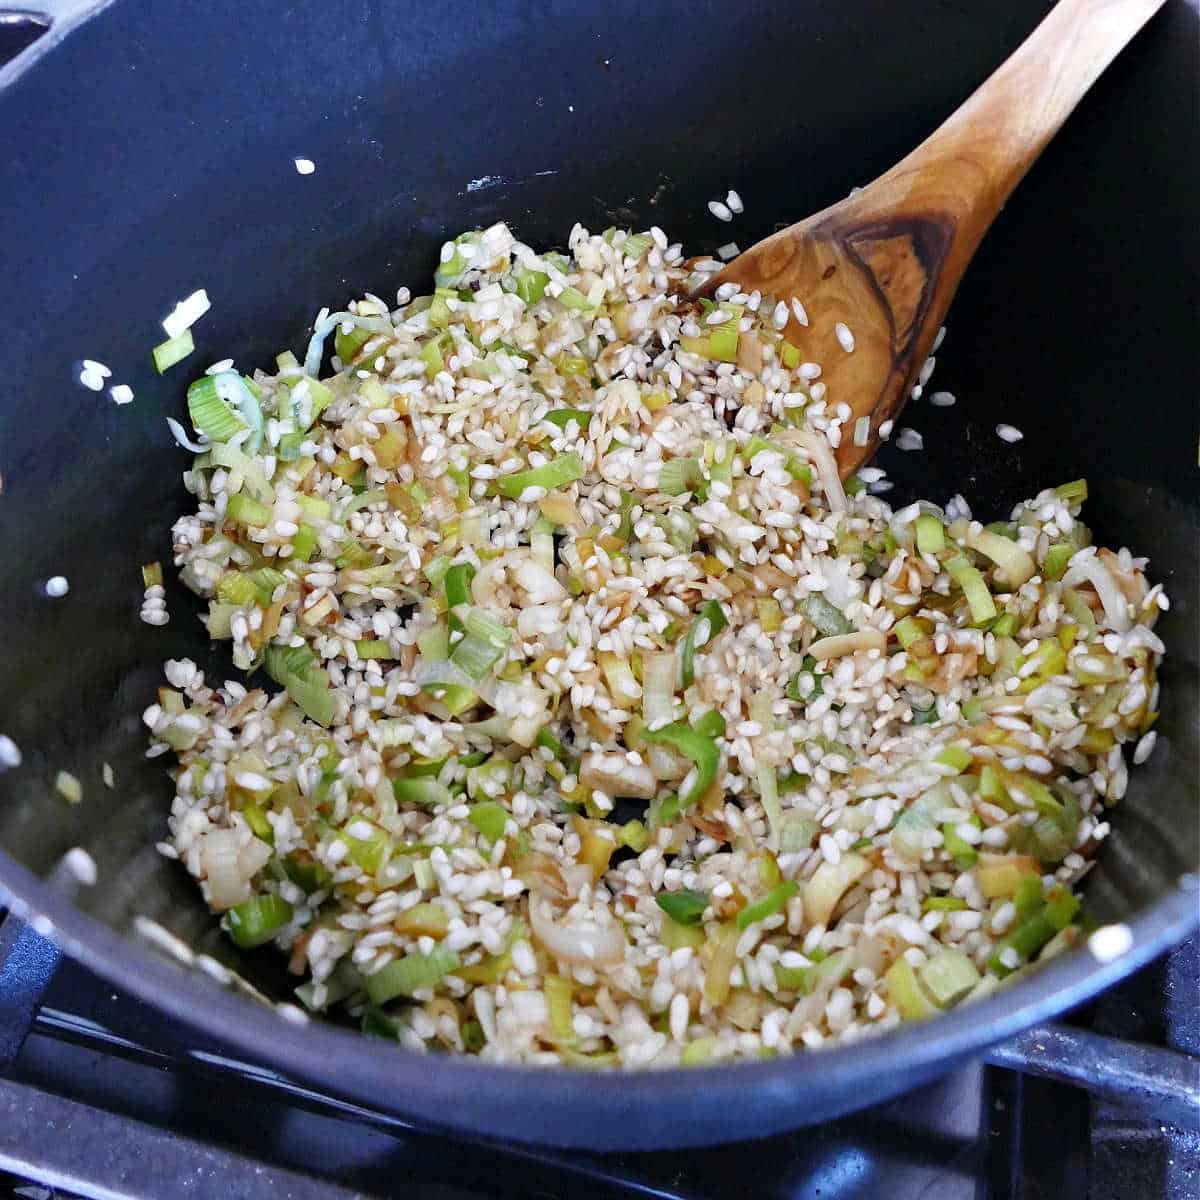 leeks and arborio rice cooking in a soup pot on a stove